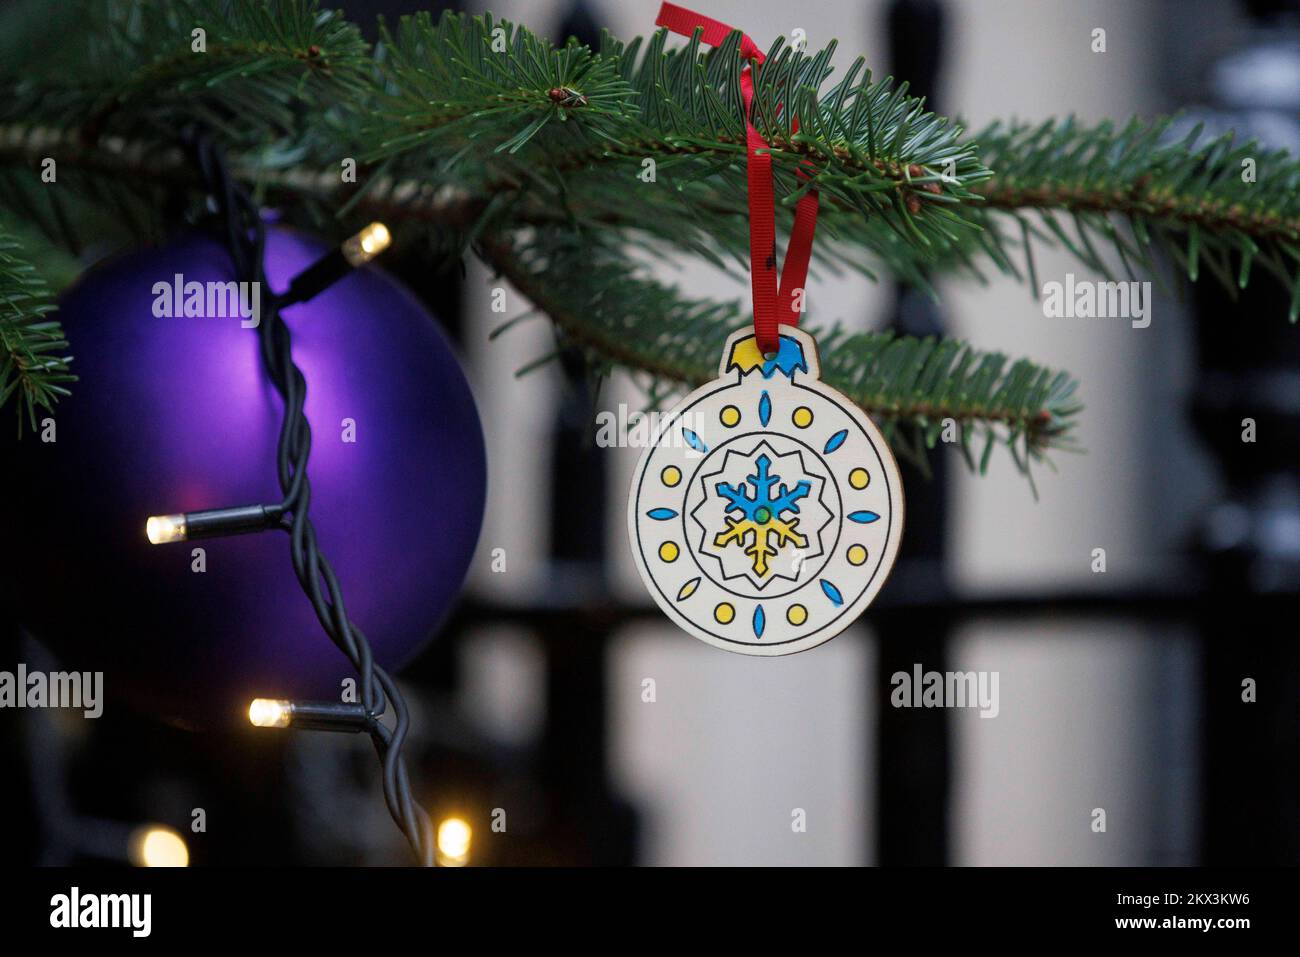 Bauble on the Christmas tree in Downing Street that Olena Zelenska, First Lady of Ukraine, hung in support of the people of Ukraine. Stock Photo